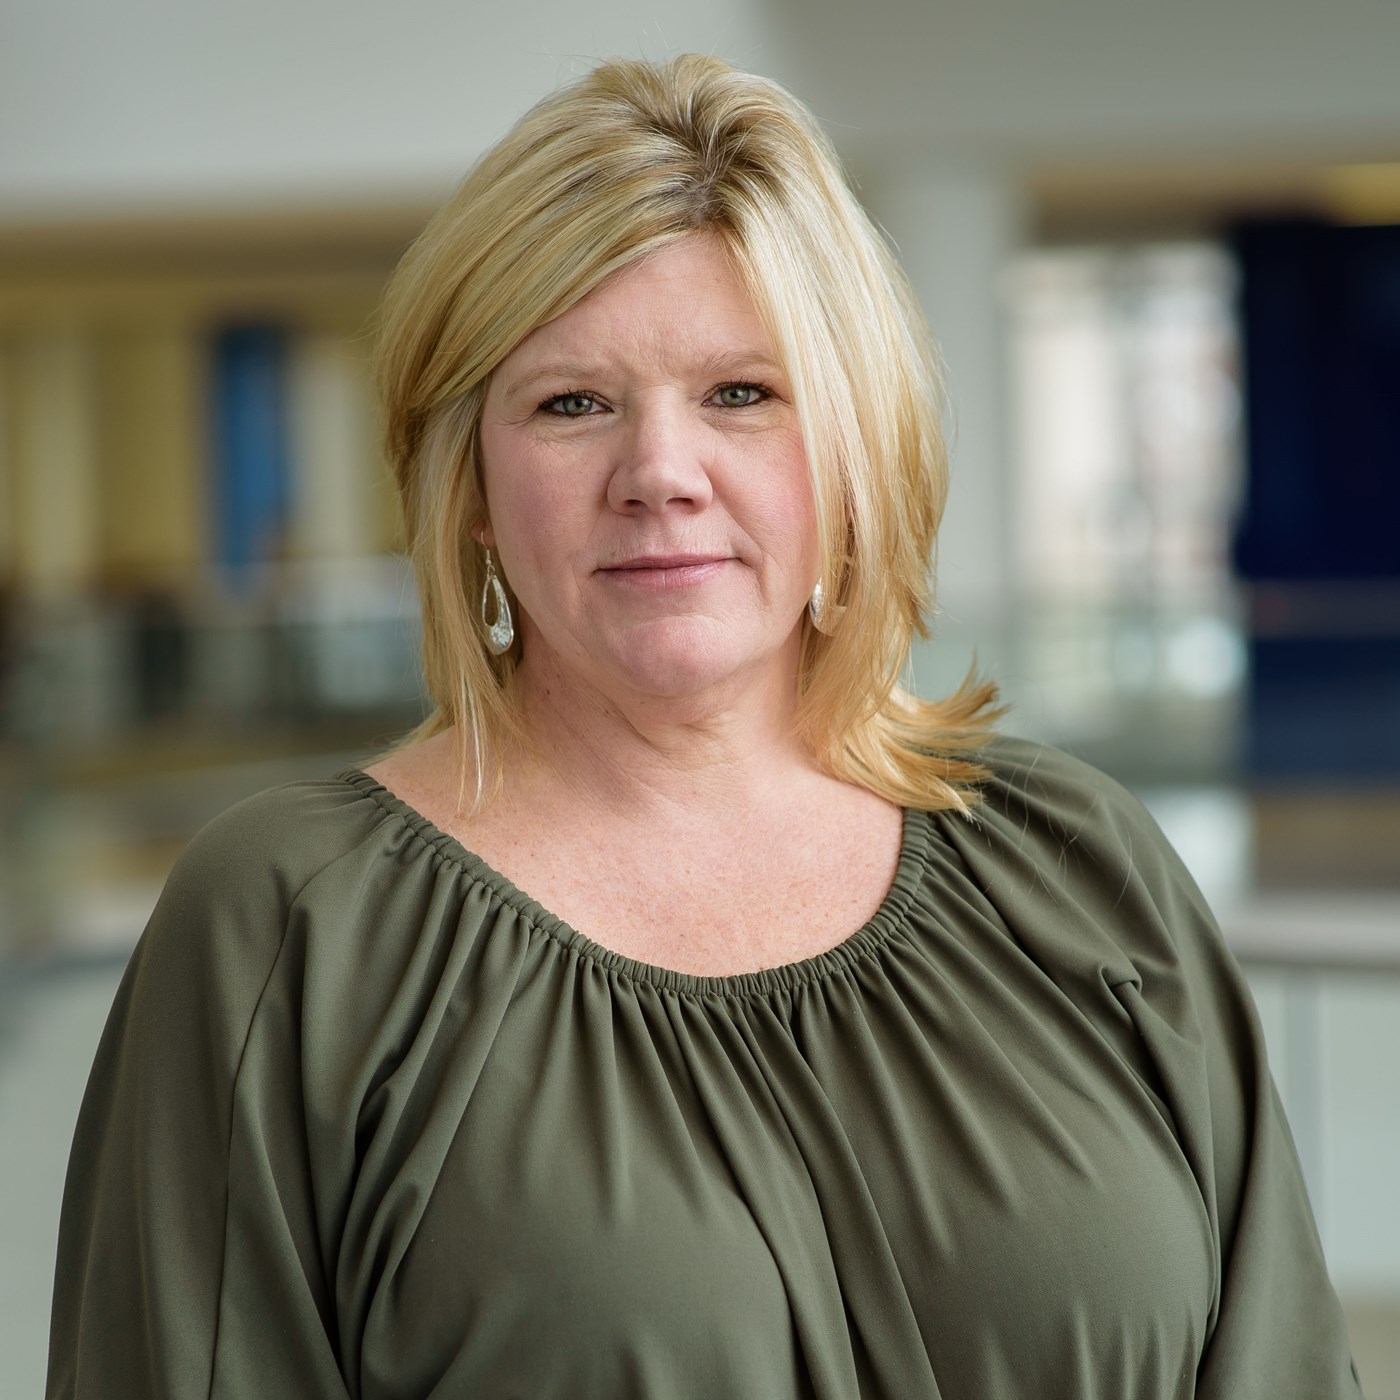 Susan D'amore is an Office Manager for HEROES & Center for Advanced Materials at UMass Lowell.